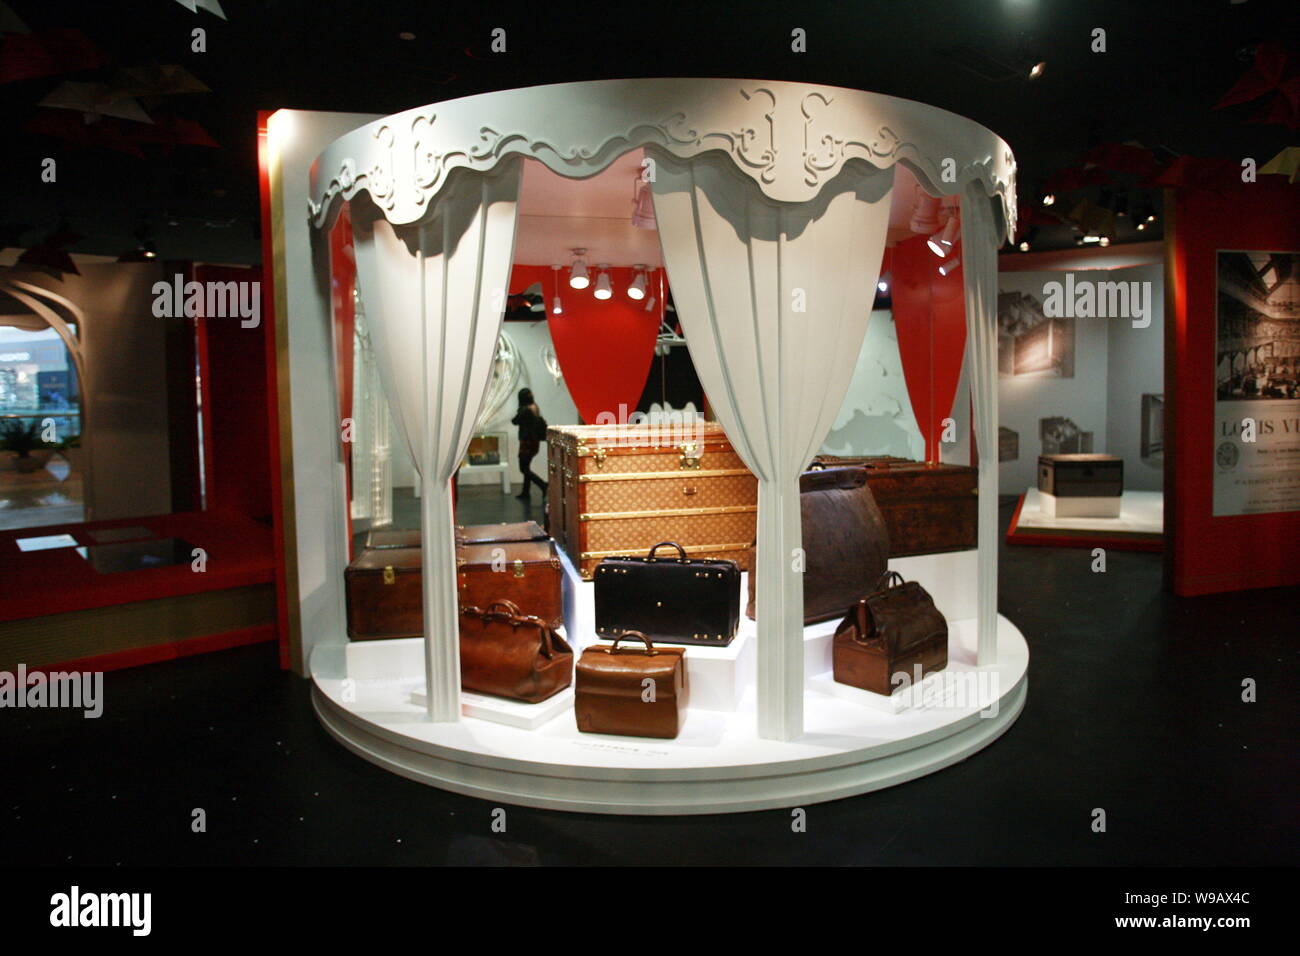 Louis Vuitton antique bags and suitcases are displayed in a